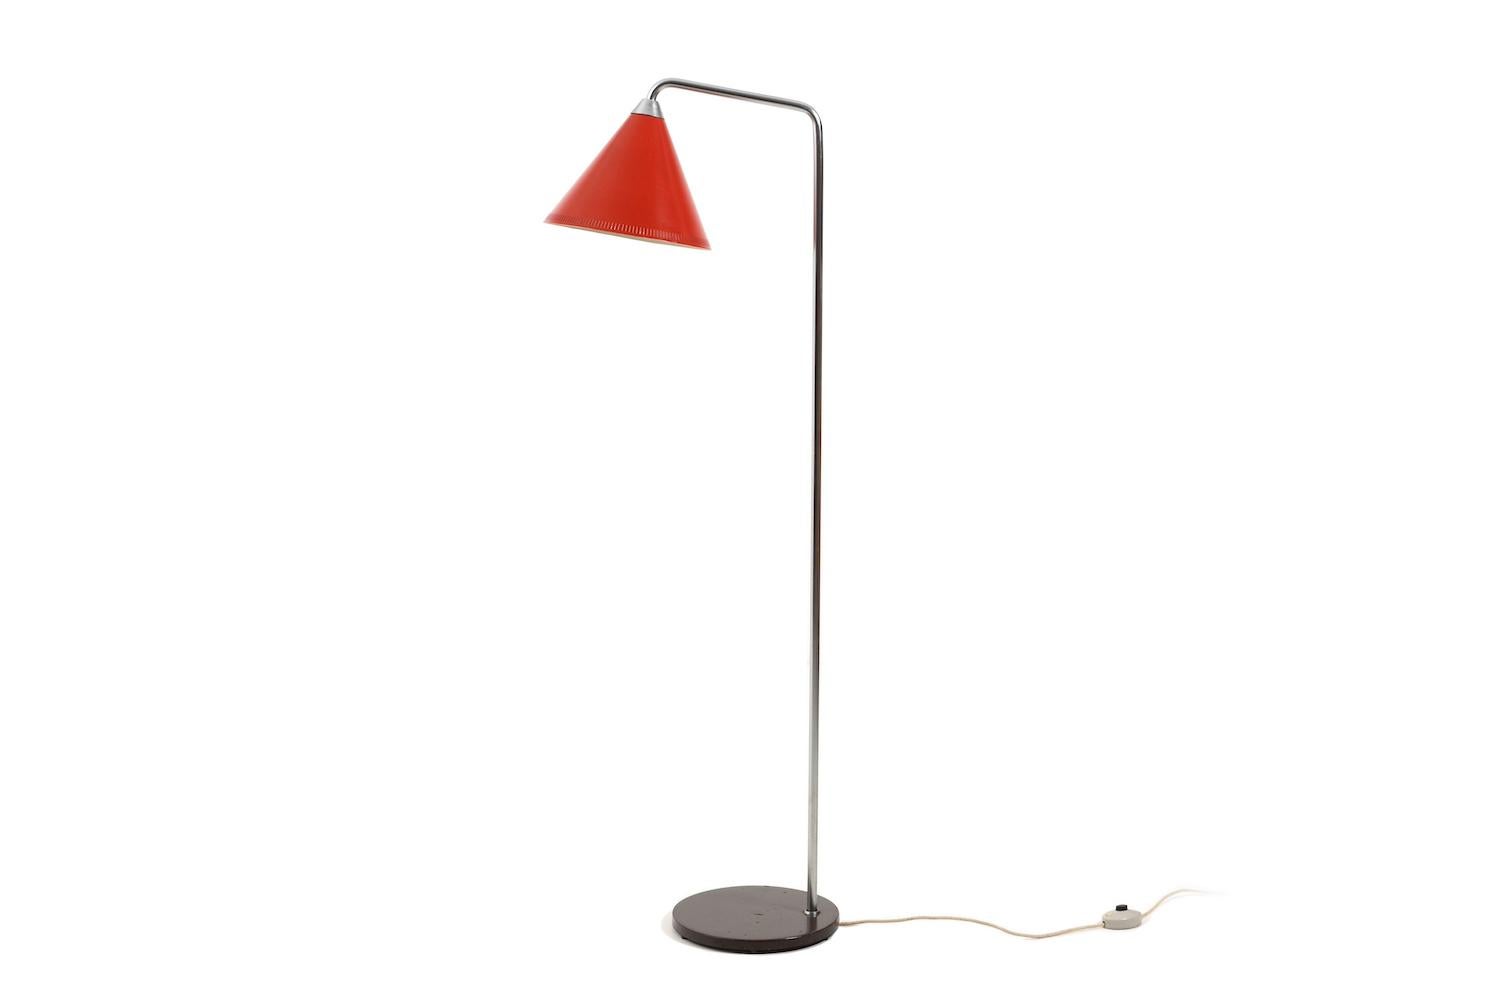 Floor lamp by Peter Hvidt for LYFA Denmark 1950s. With red conical metal shade. Dark brown lacquered base and steel lamp shaft. This version comes with the switch on the cable. We have also the same with black shade here on 1stDibs.